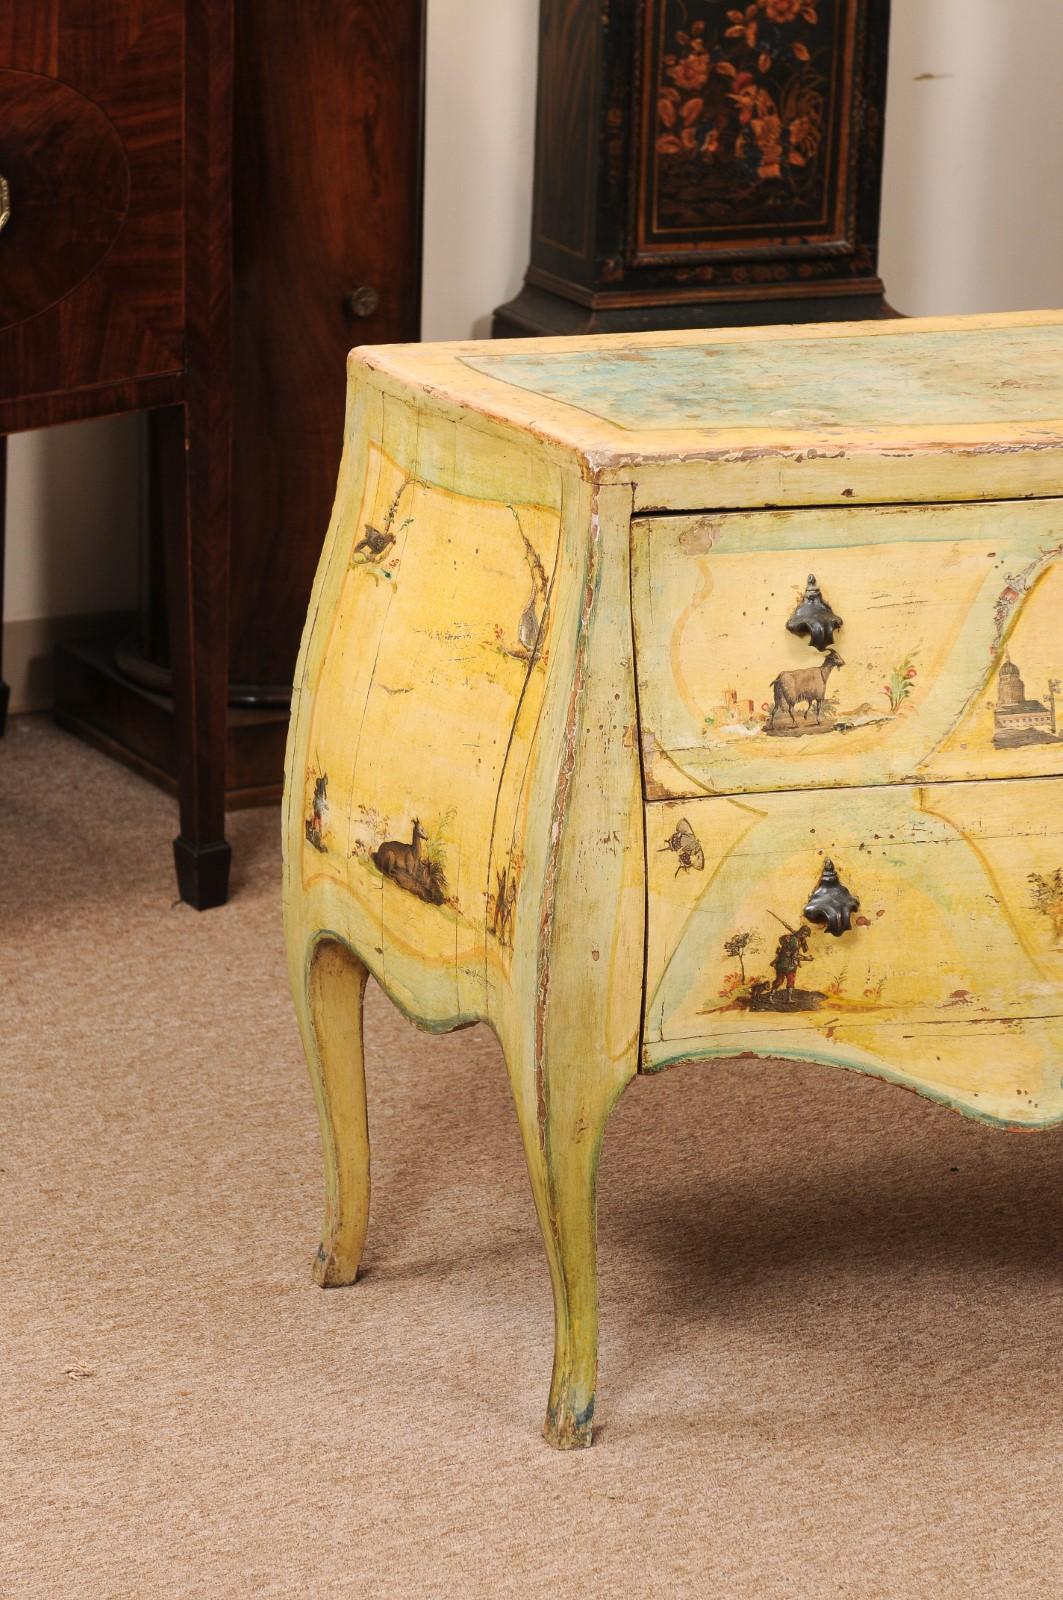  18th Century Italian Venetian Painted Yellow Commode with Decoupage Decoration  In Fair Condition For Sale In Atlanta, GA